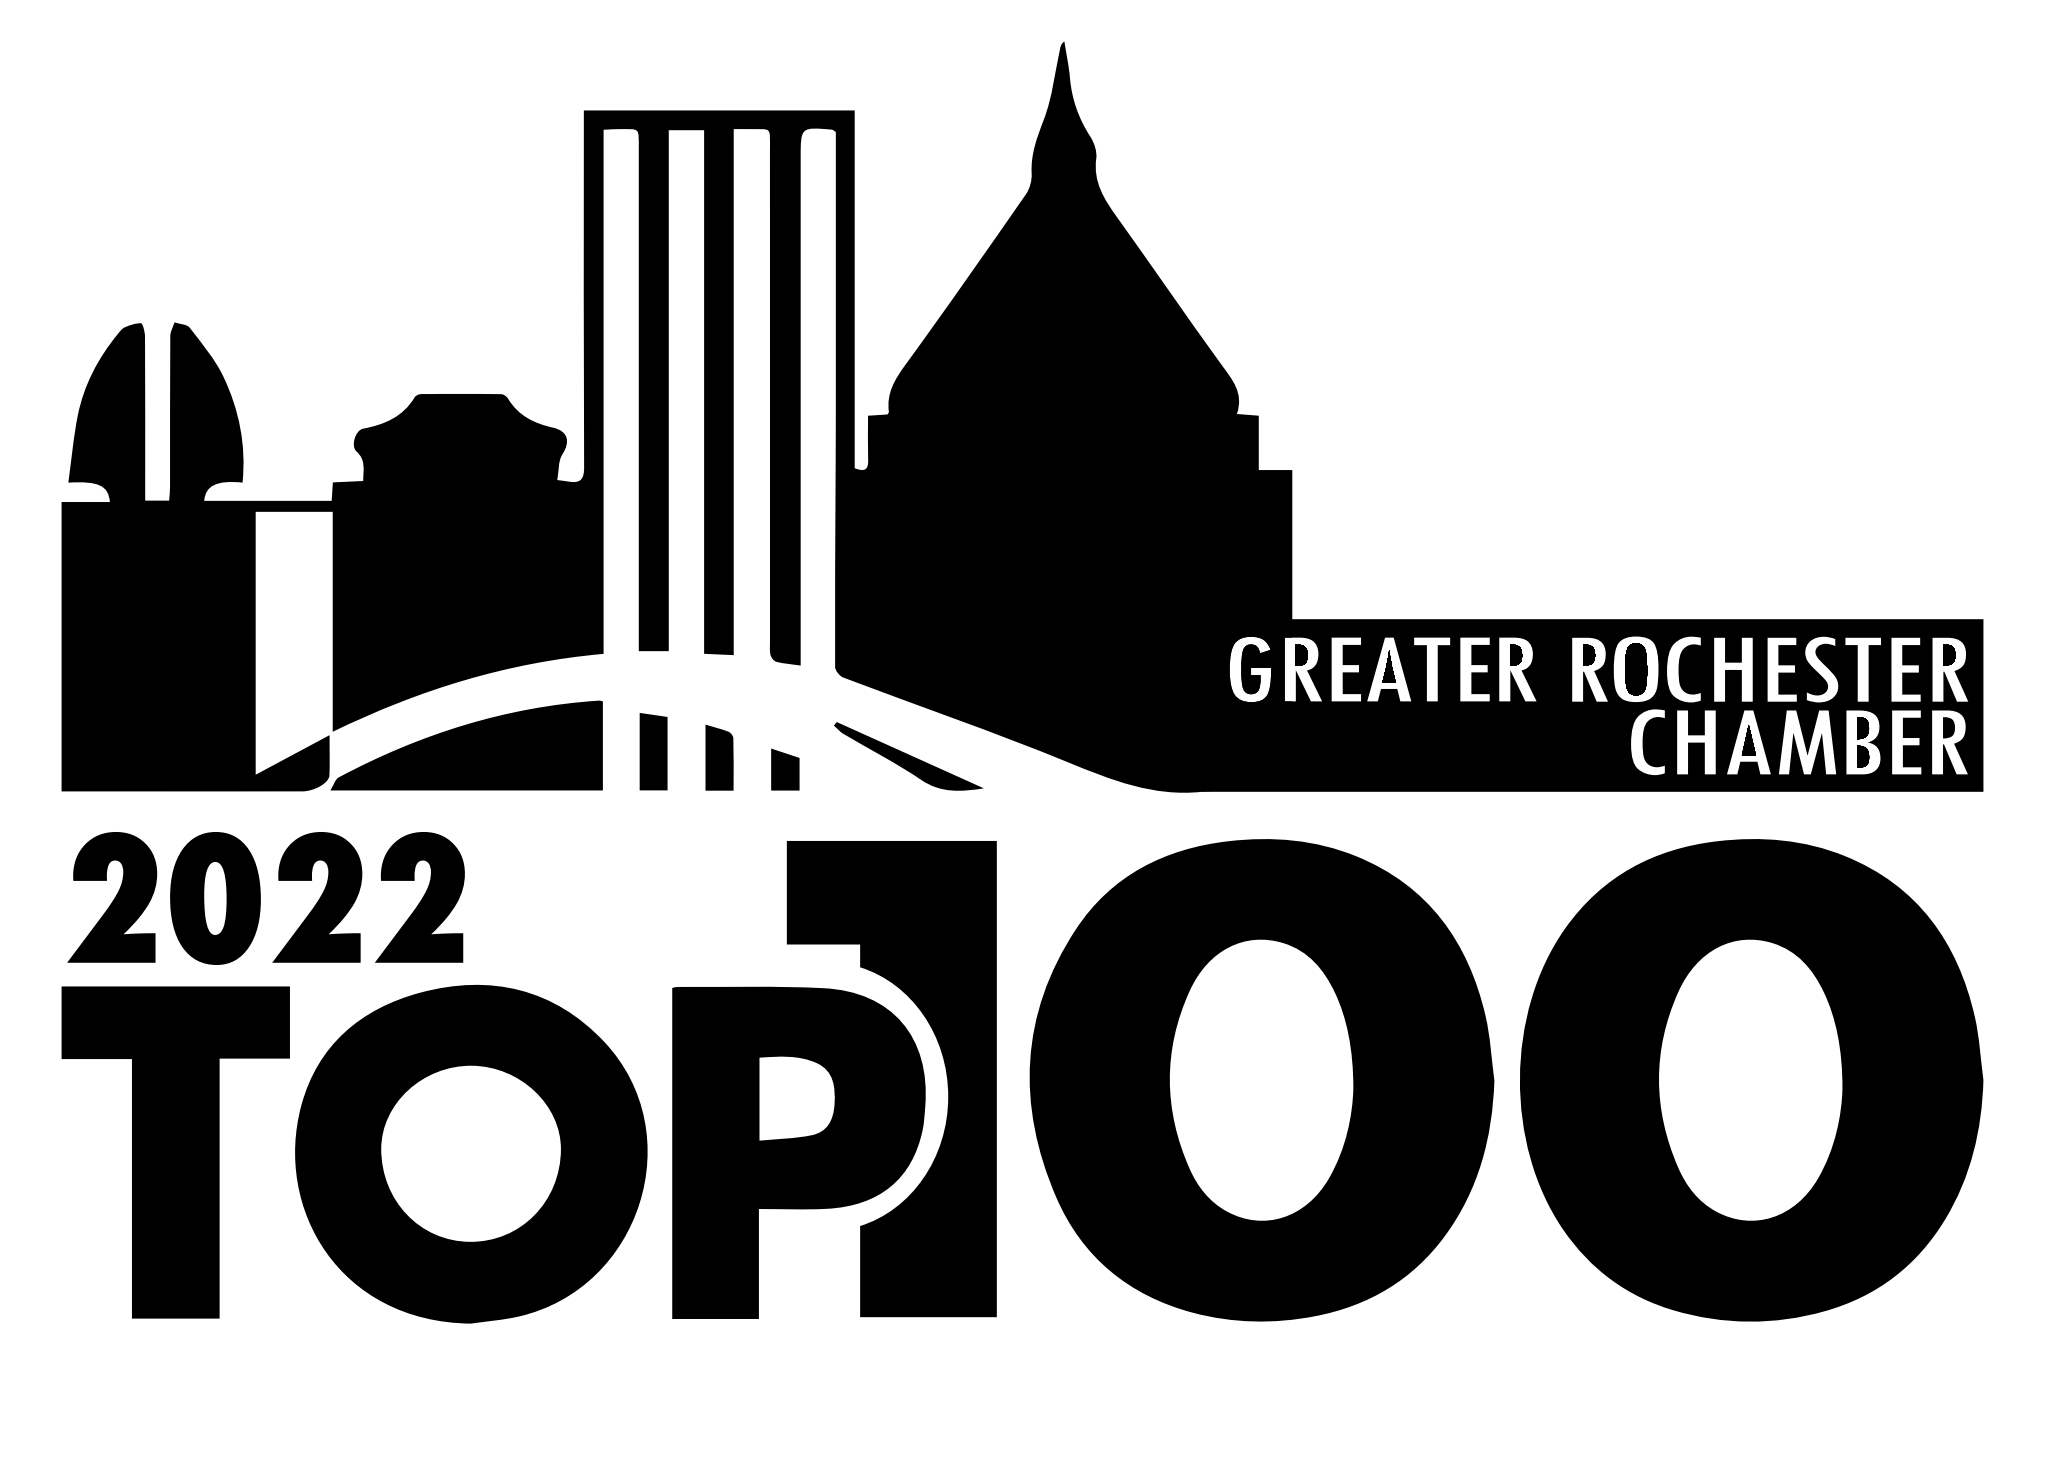 D&C Rochester Top Workplaces 2020